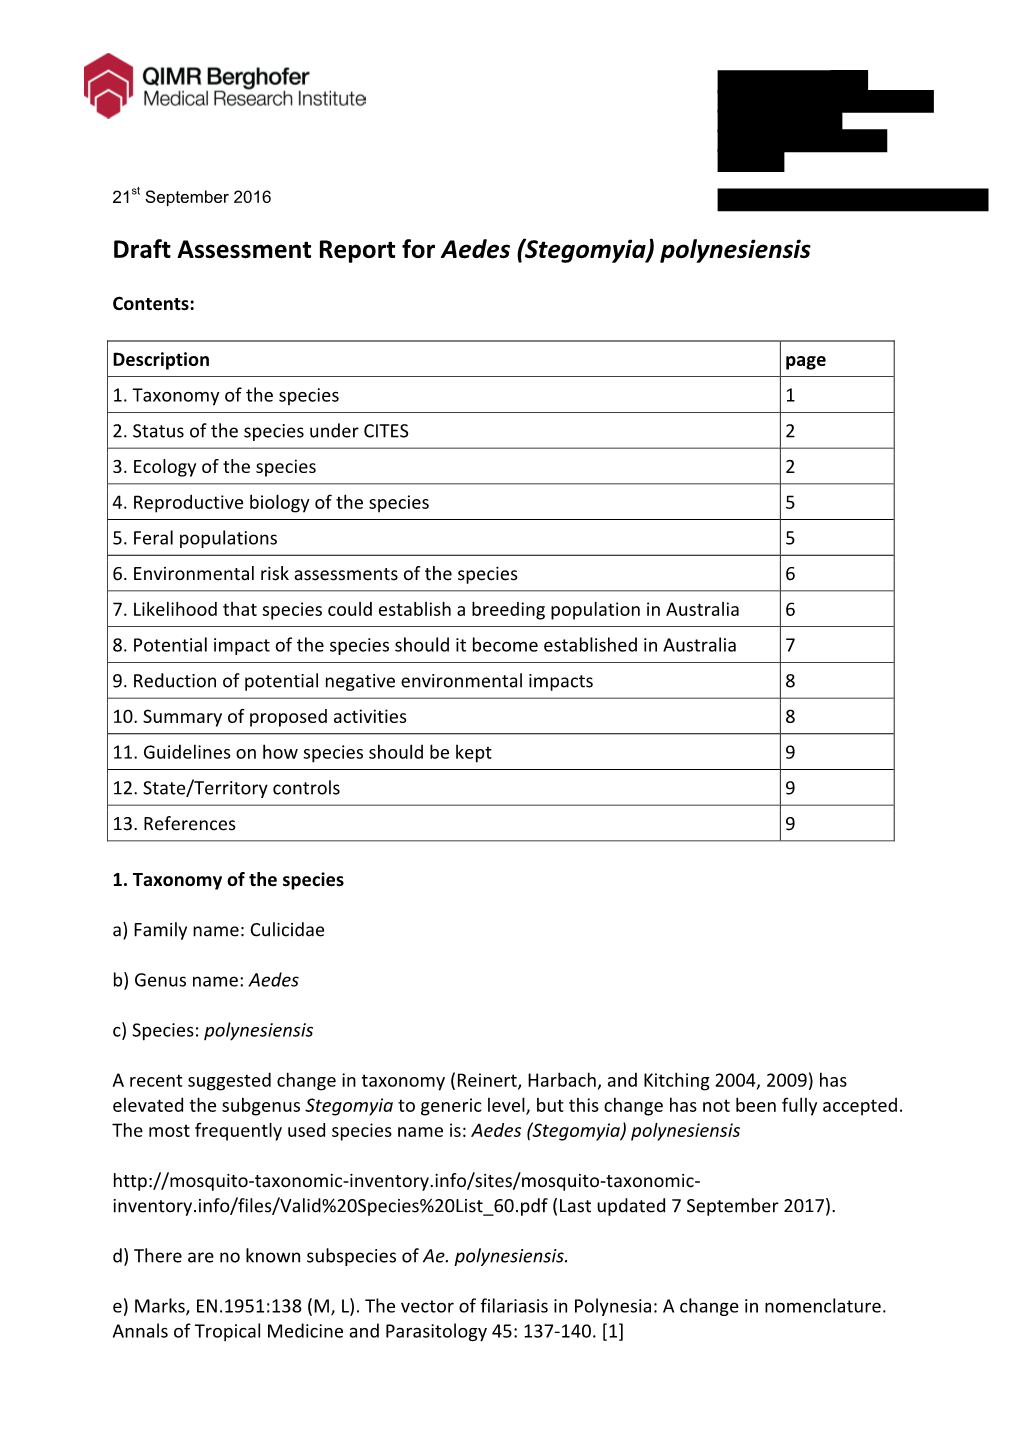 Draft Assessment Report for Aedes (Stegomyia) Polynesiensis